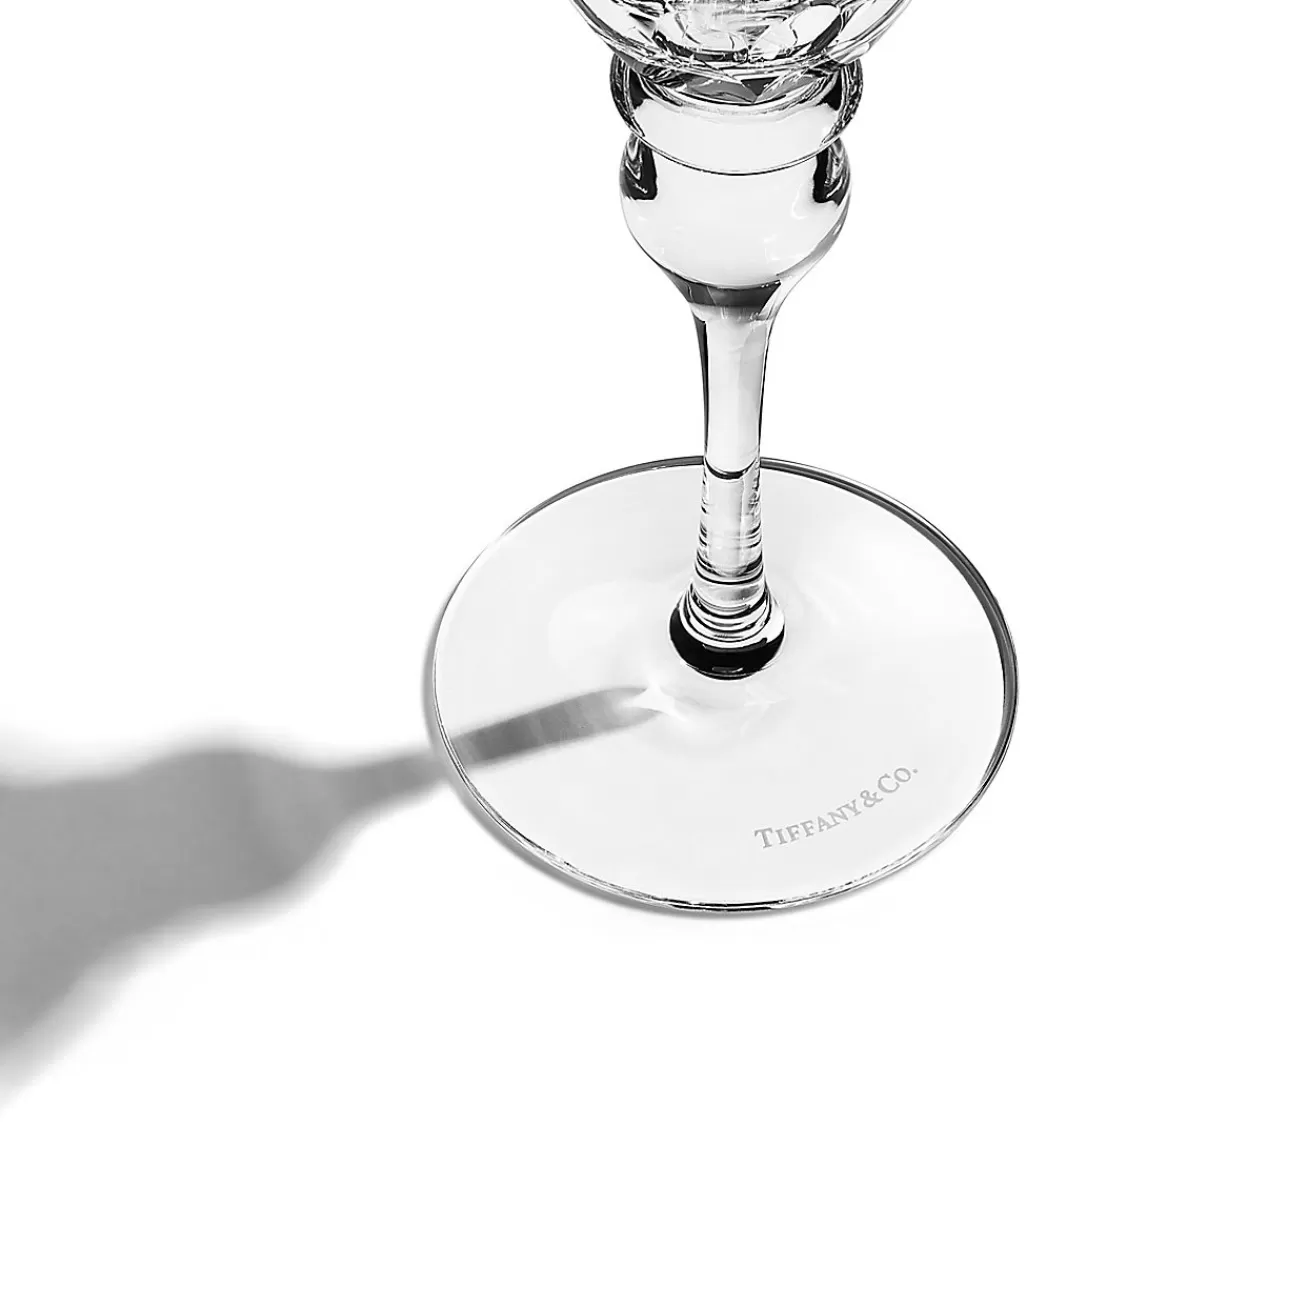 Tiffany & Co. Tiffany Crest Red Wine Glass in Crystal Glass | ^ The Home | Housewarming Gifts